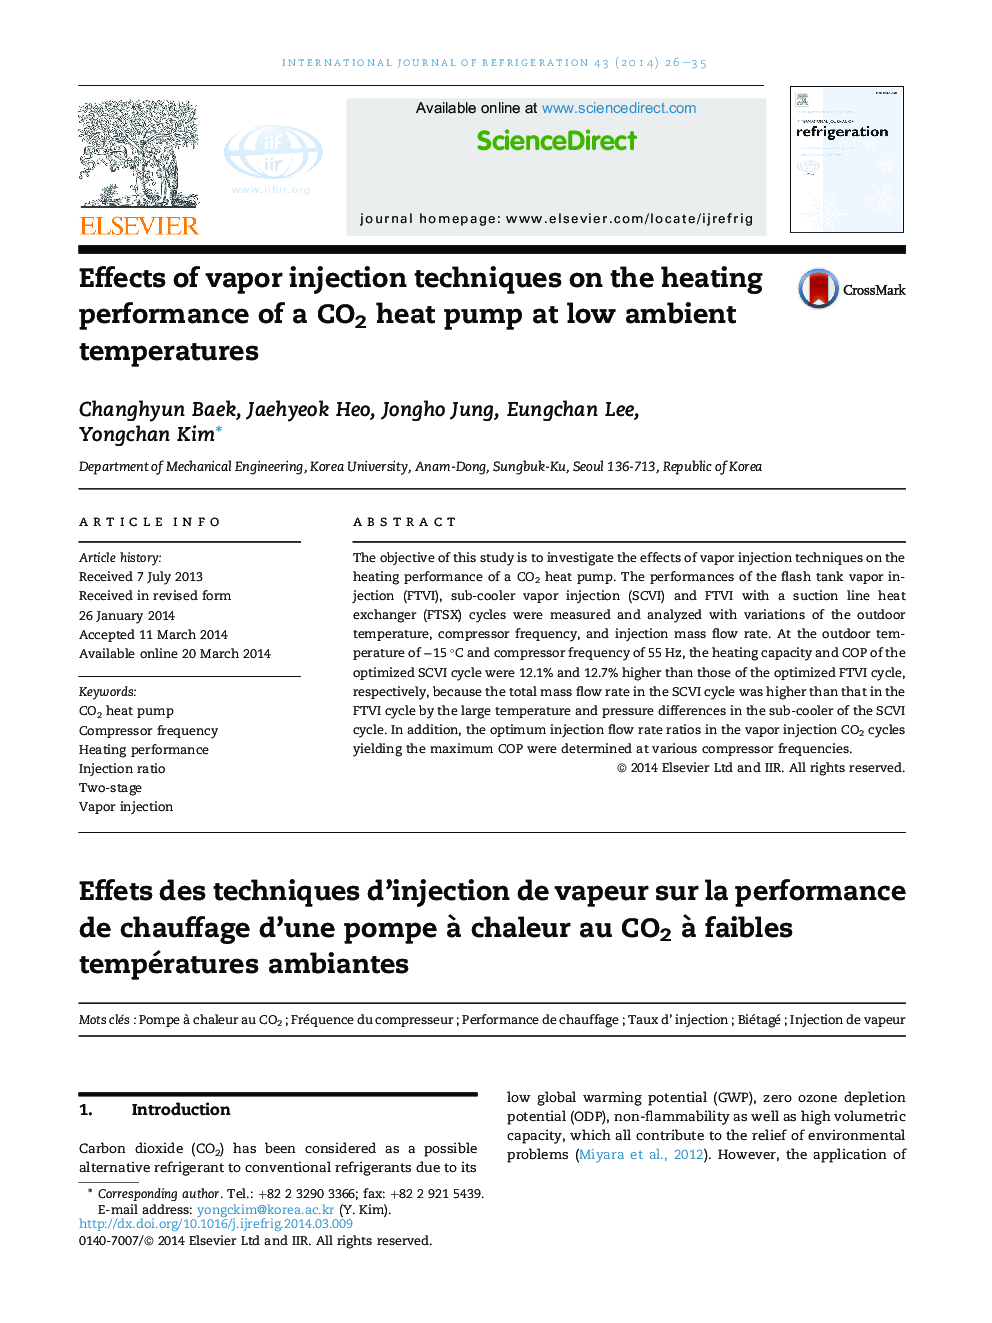 Effects of vapor injection techniques on the heating performance of a CO2 heat pump at low ambient temperatures